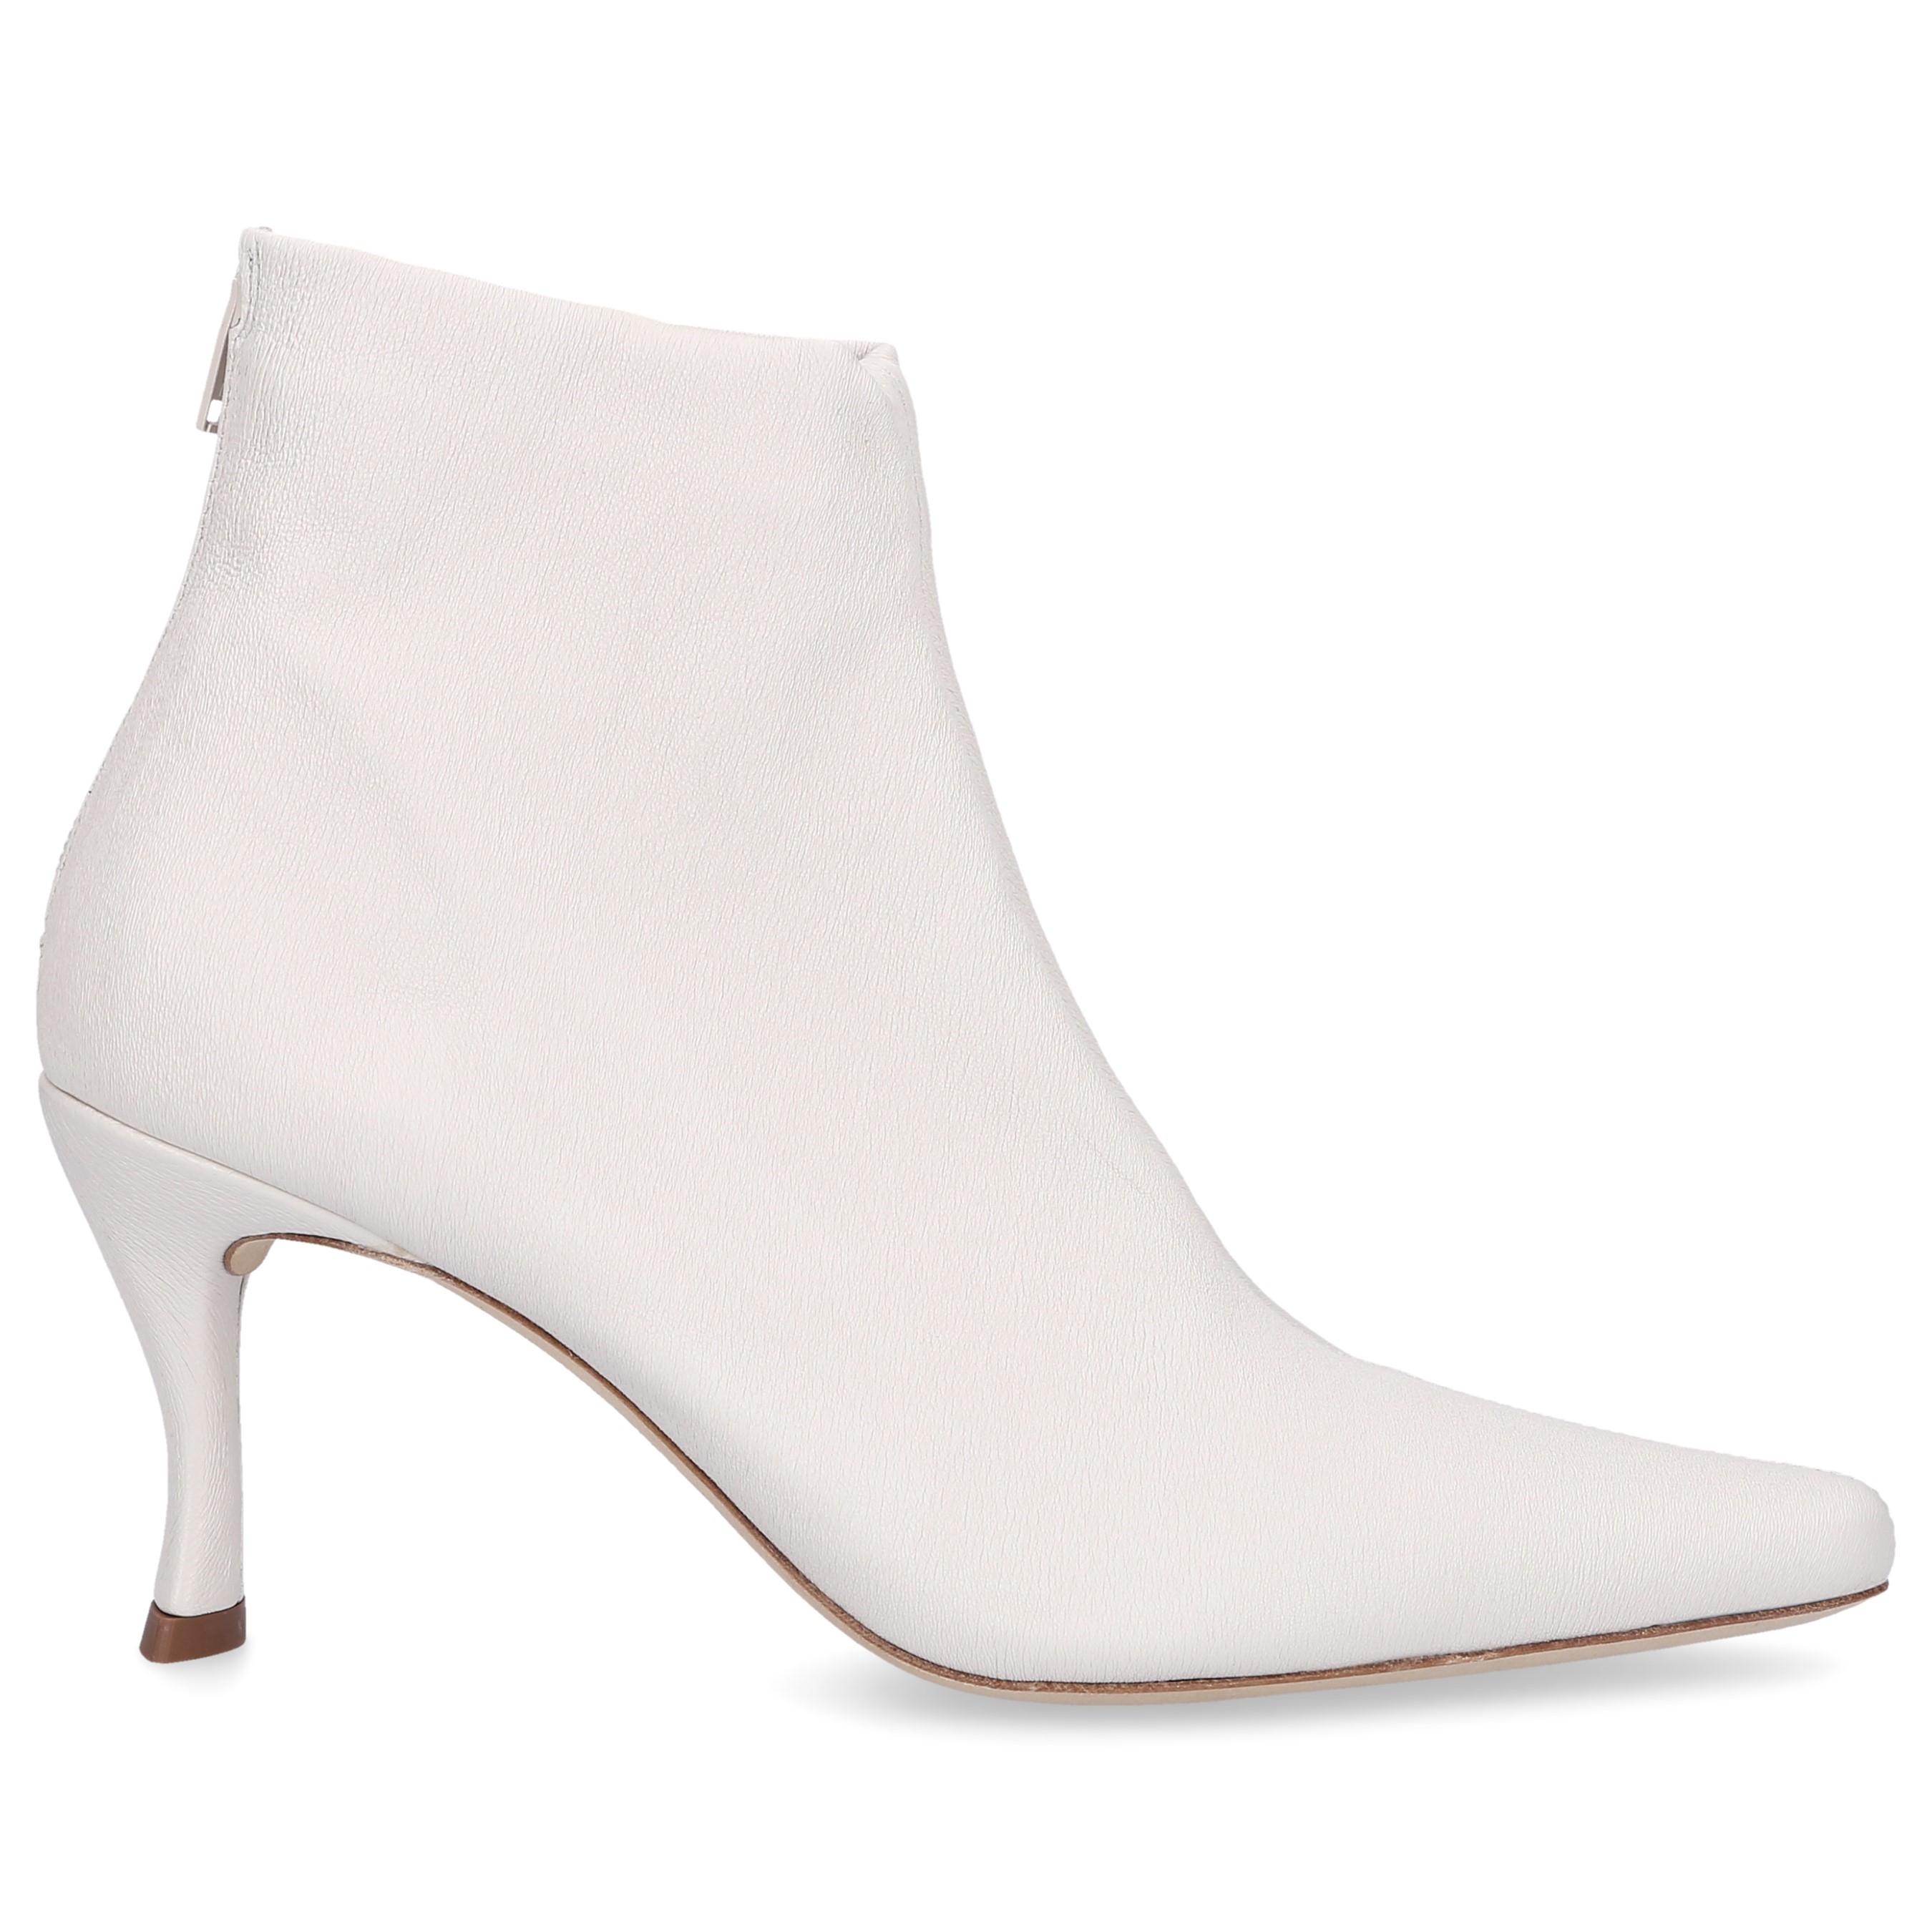 BY FAR Suede Ankle Boots White Stevie - Lyst